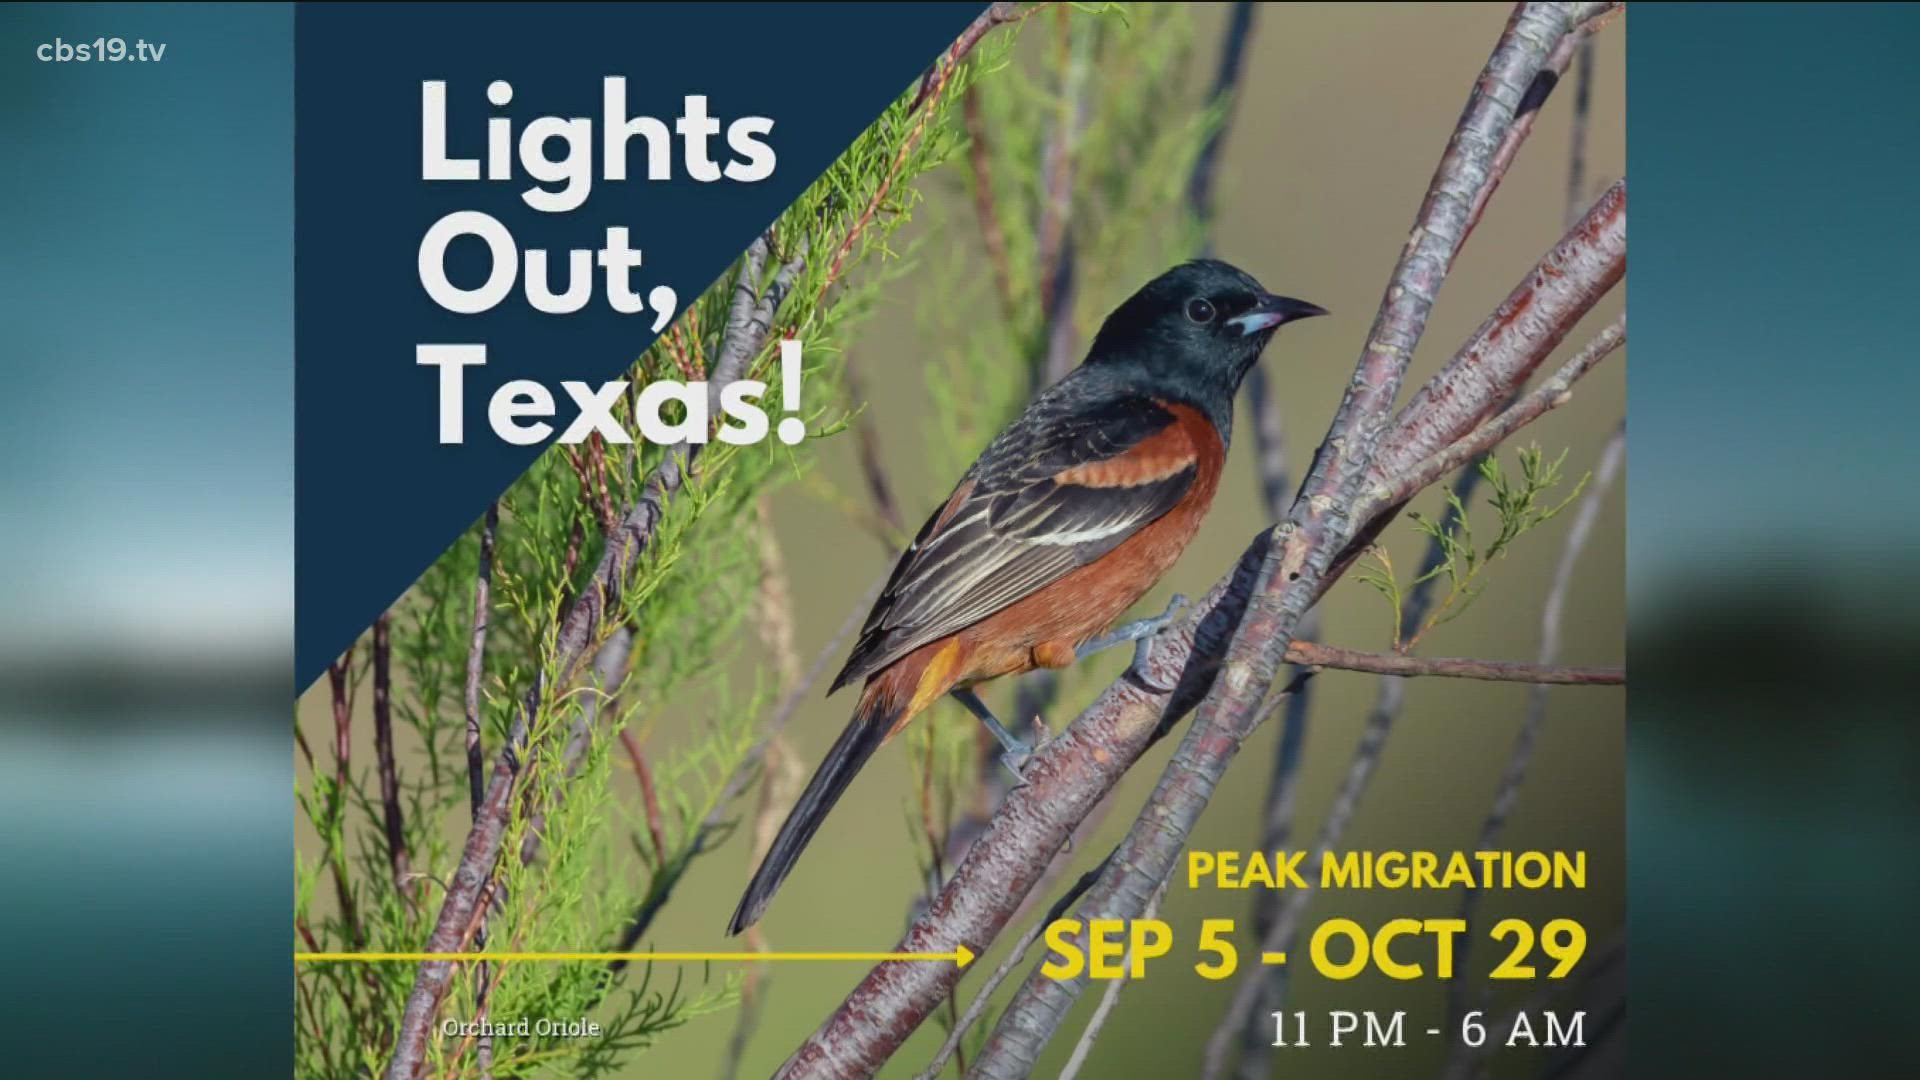 The "Lights Out for Wildlife" is a movement of reducing light pollution by diming or turning off non-essential lighting during peak migration periods